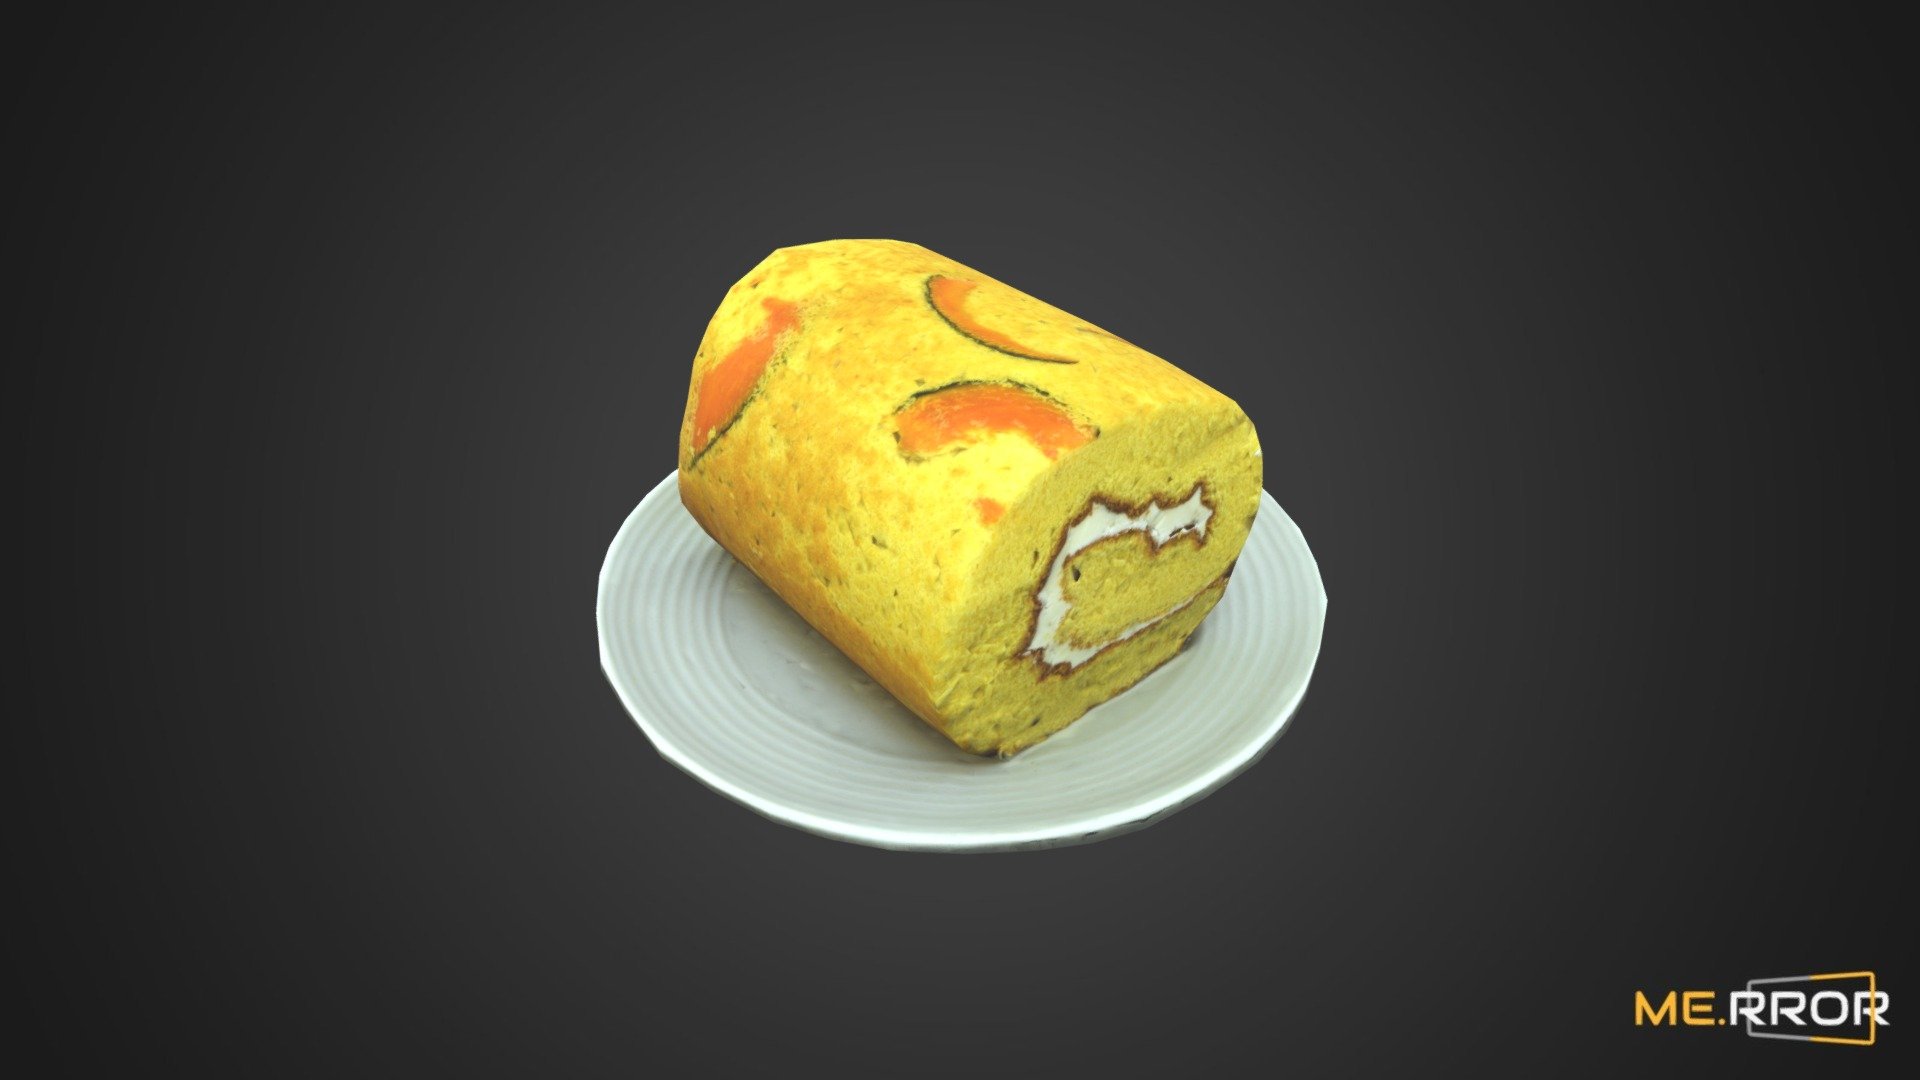 MERROR is a 3D Content PLATFORM which introduces various Asian assets to the 3D world


3DScanning #Photogrametry #ME.RROR - [Game-Ready] Sweet Pumpkin Roll Cake - Buy Royalty Free 3D model by ME.RROR Studio (@merror) 3d model